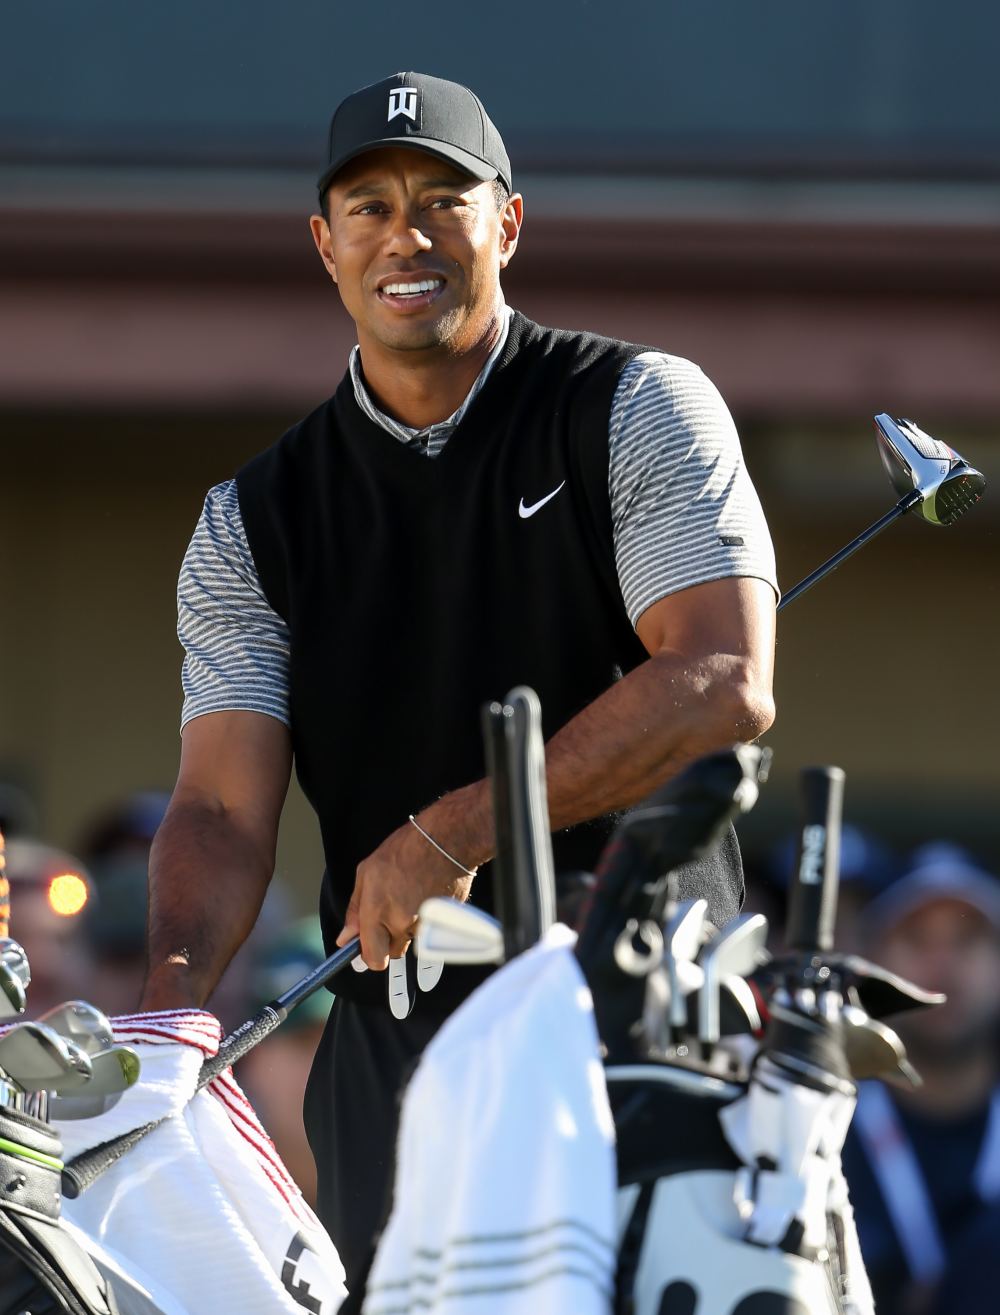 Tiger Woods Is 'Recovering' After Follow-Up Procedures on Leg Injuries Related to Car Crash